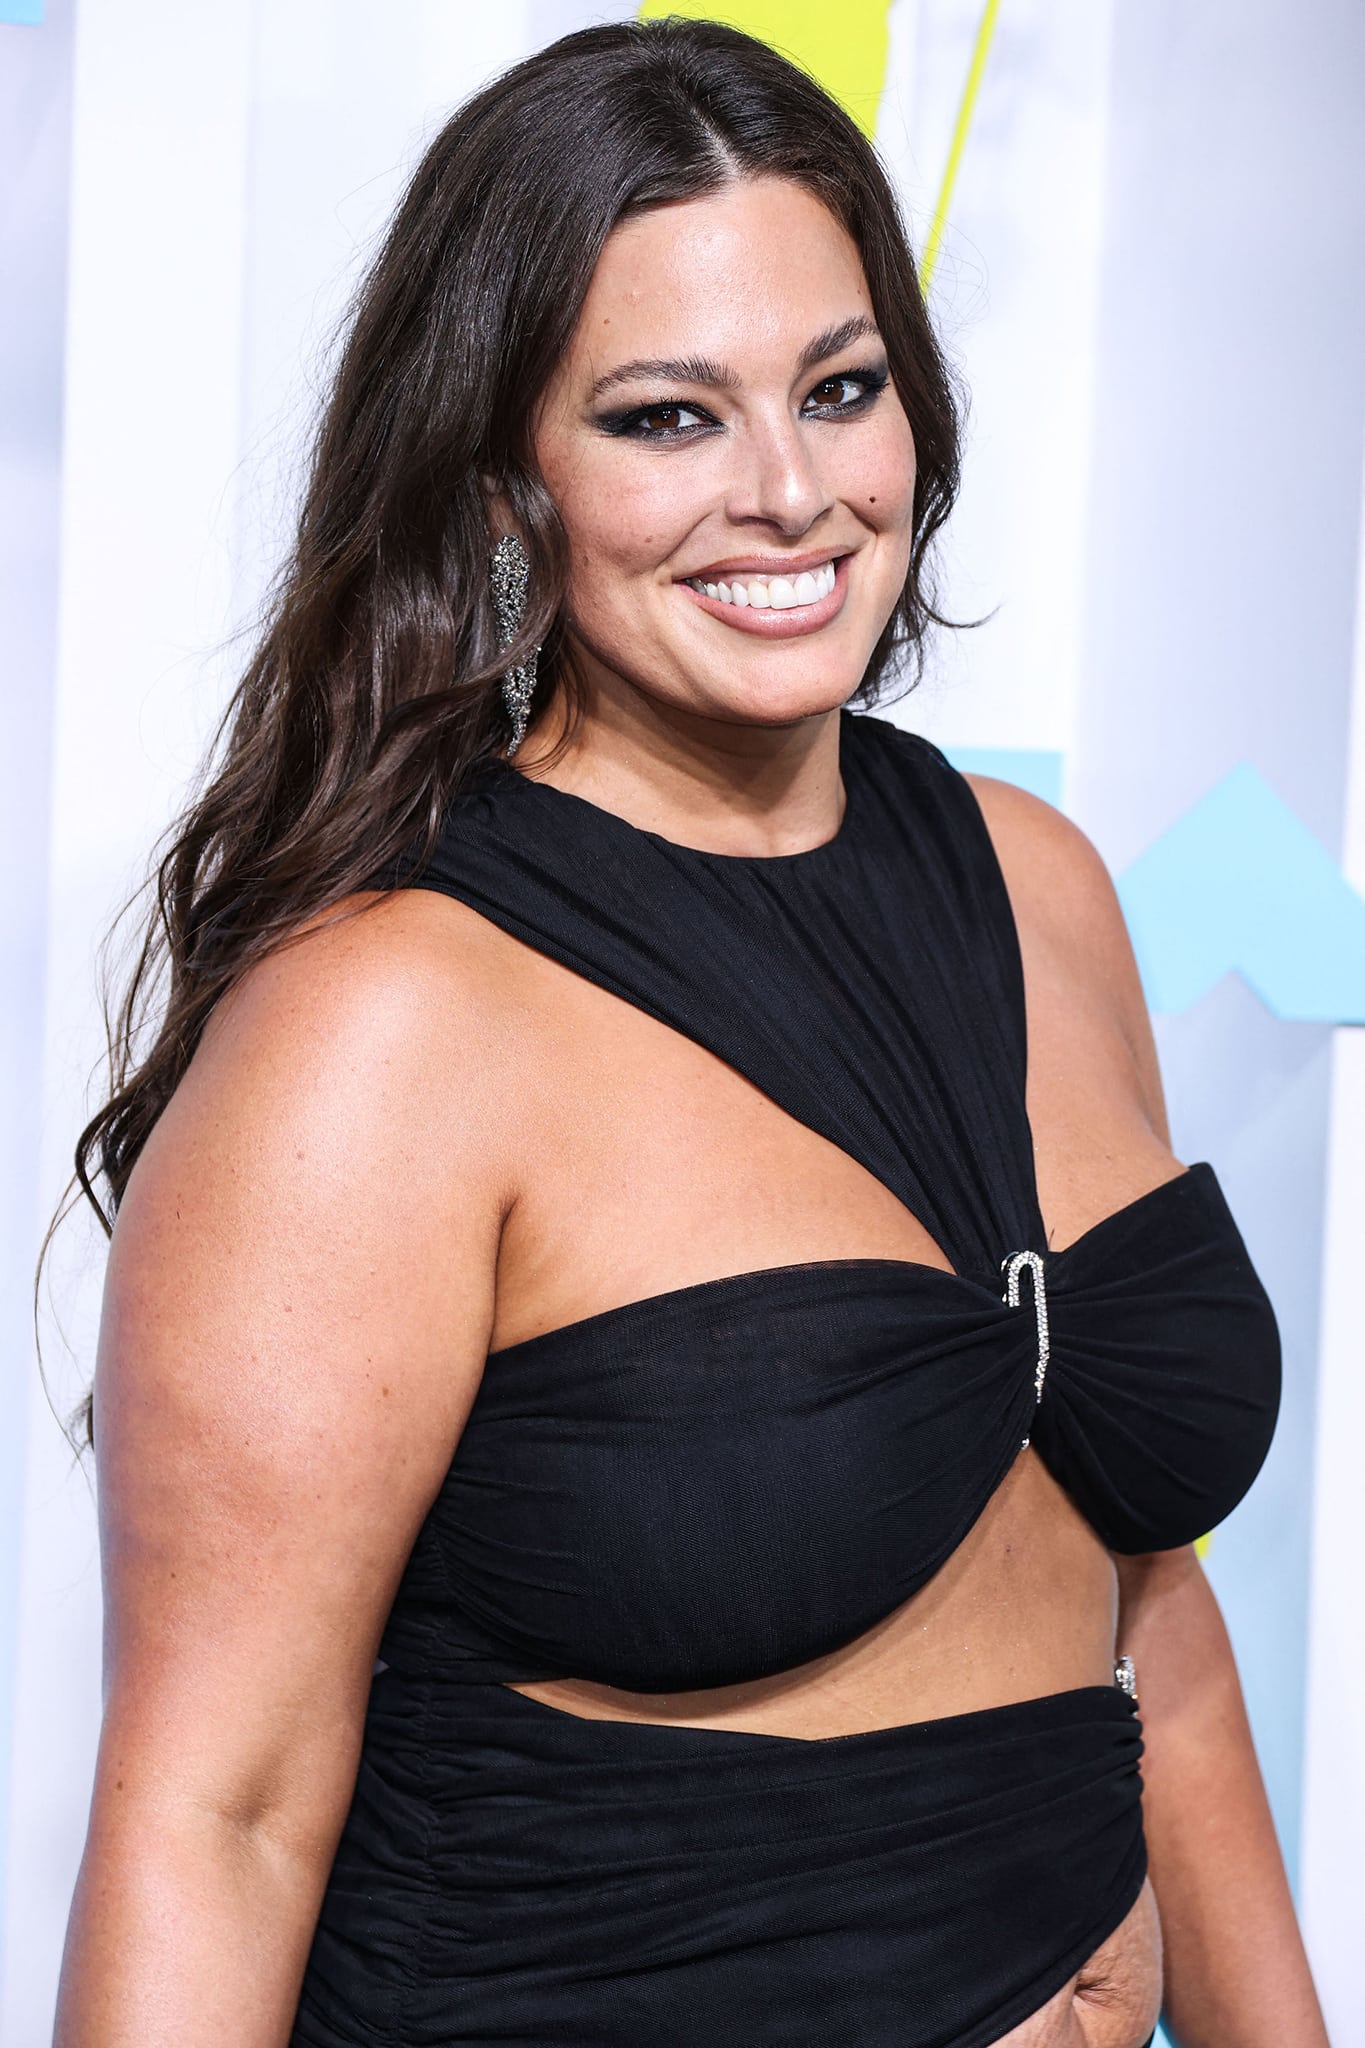 Ashley Graham amps up the glamour with dramatic smokey eye-makeup, brushed-up brows, and wavy hairstyle